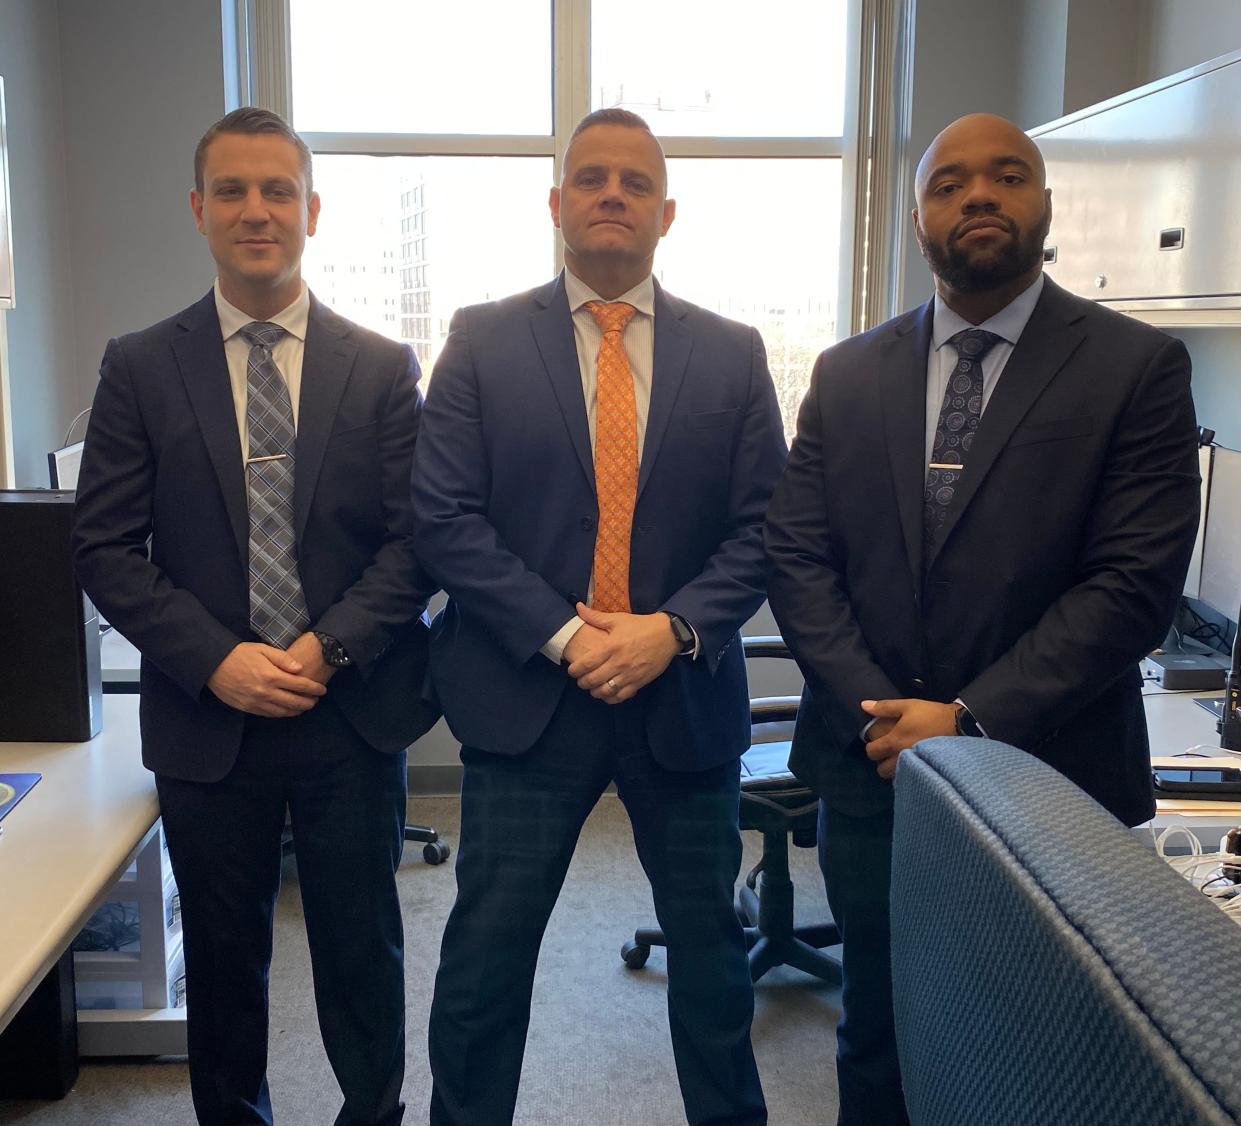 Detective Mitchell Guerra, Detective Sgt. Jonathan Primiano and Detective Joseph Nezier, from left, make up the Providence Police Department's new Digital Intelligence Unit, which gleans evidence from computer hard drives, seized cellphones, video, social media and other sources.